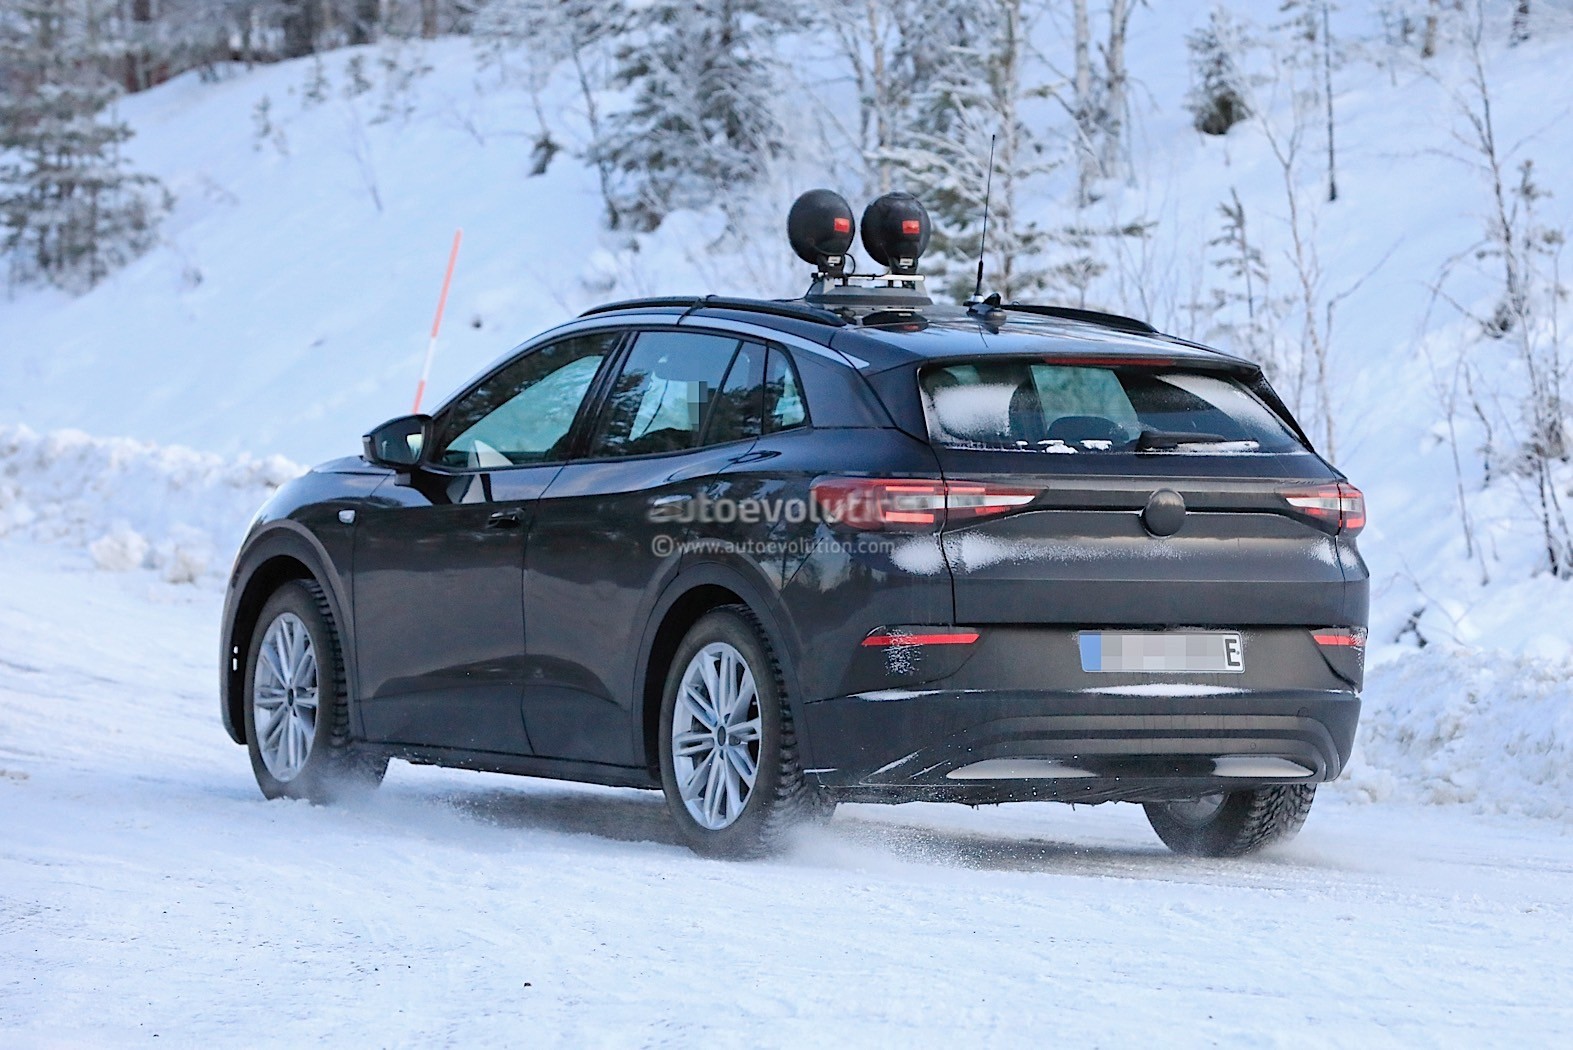 2022 VW ID.4 Electric SUV Spied Trying To Look Like An Opel